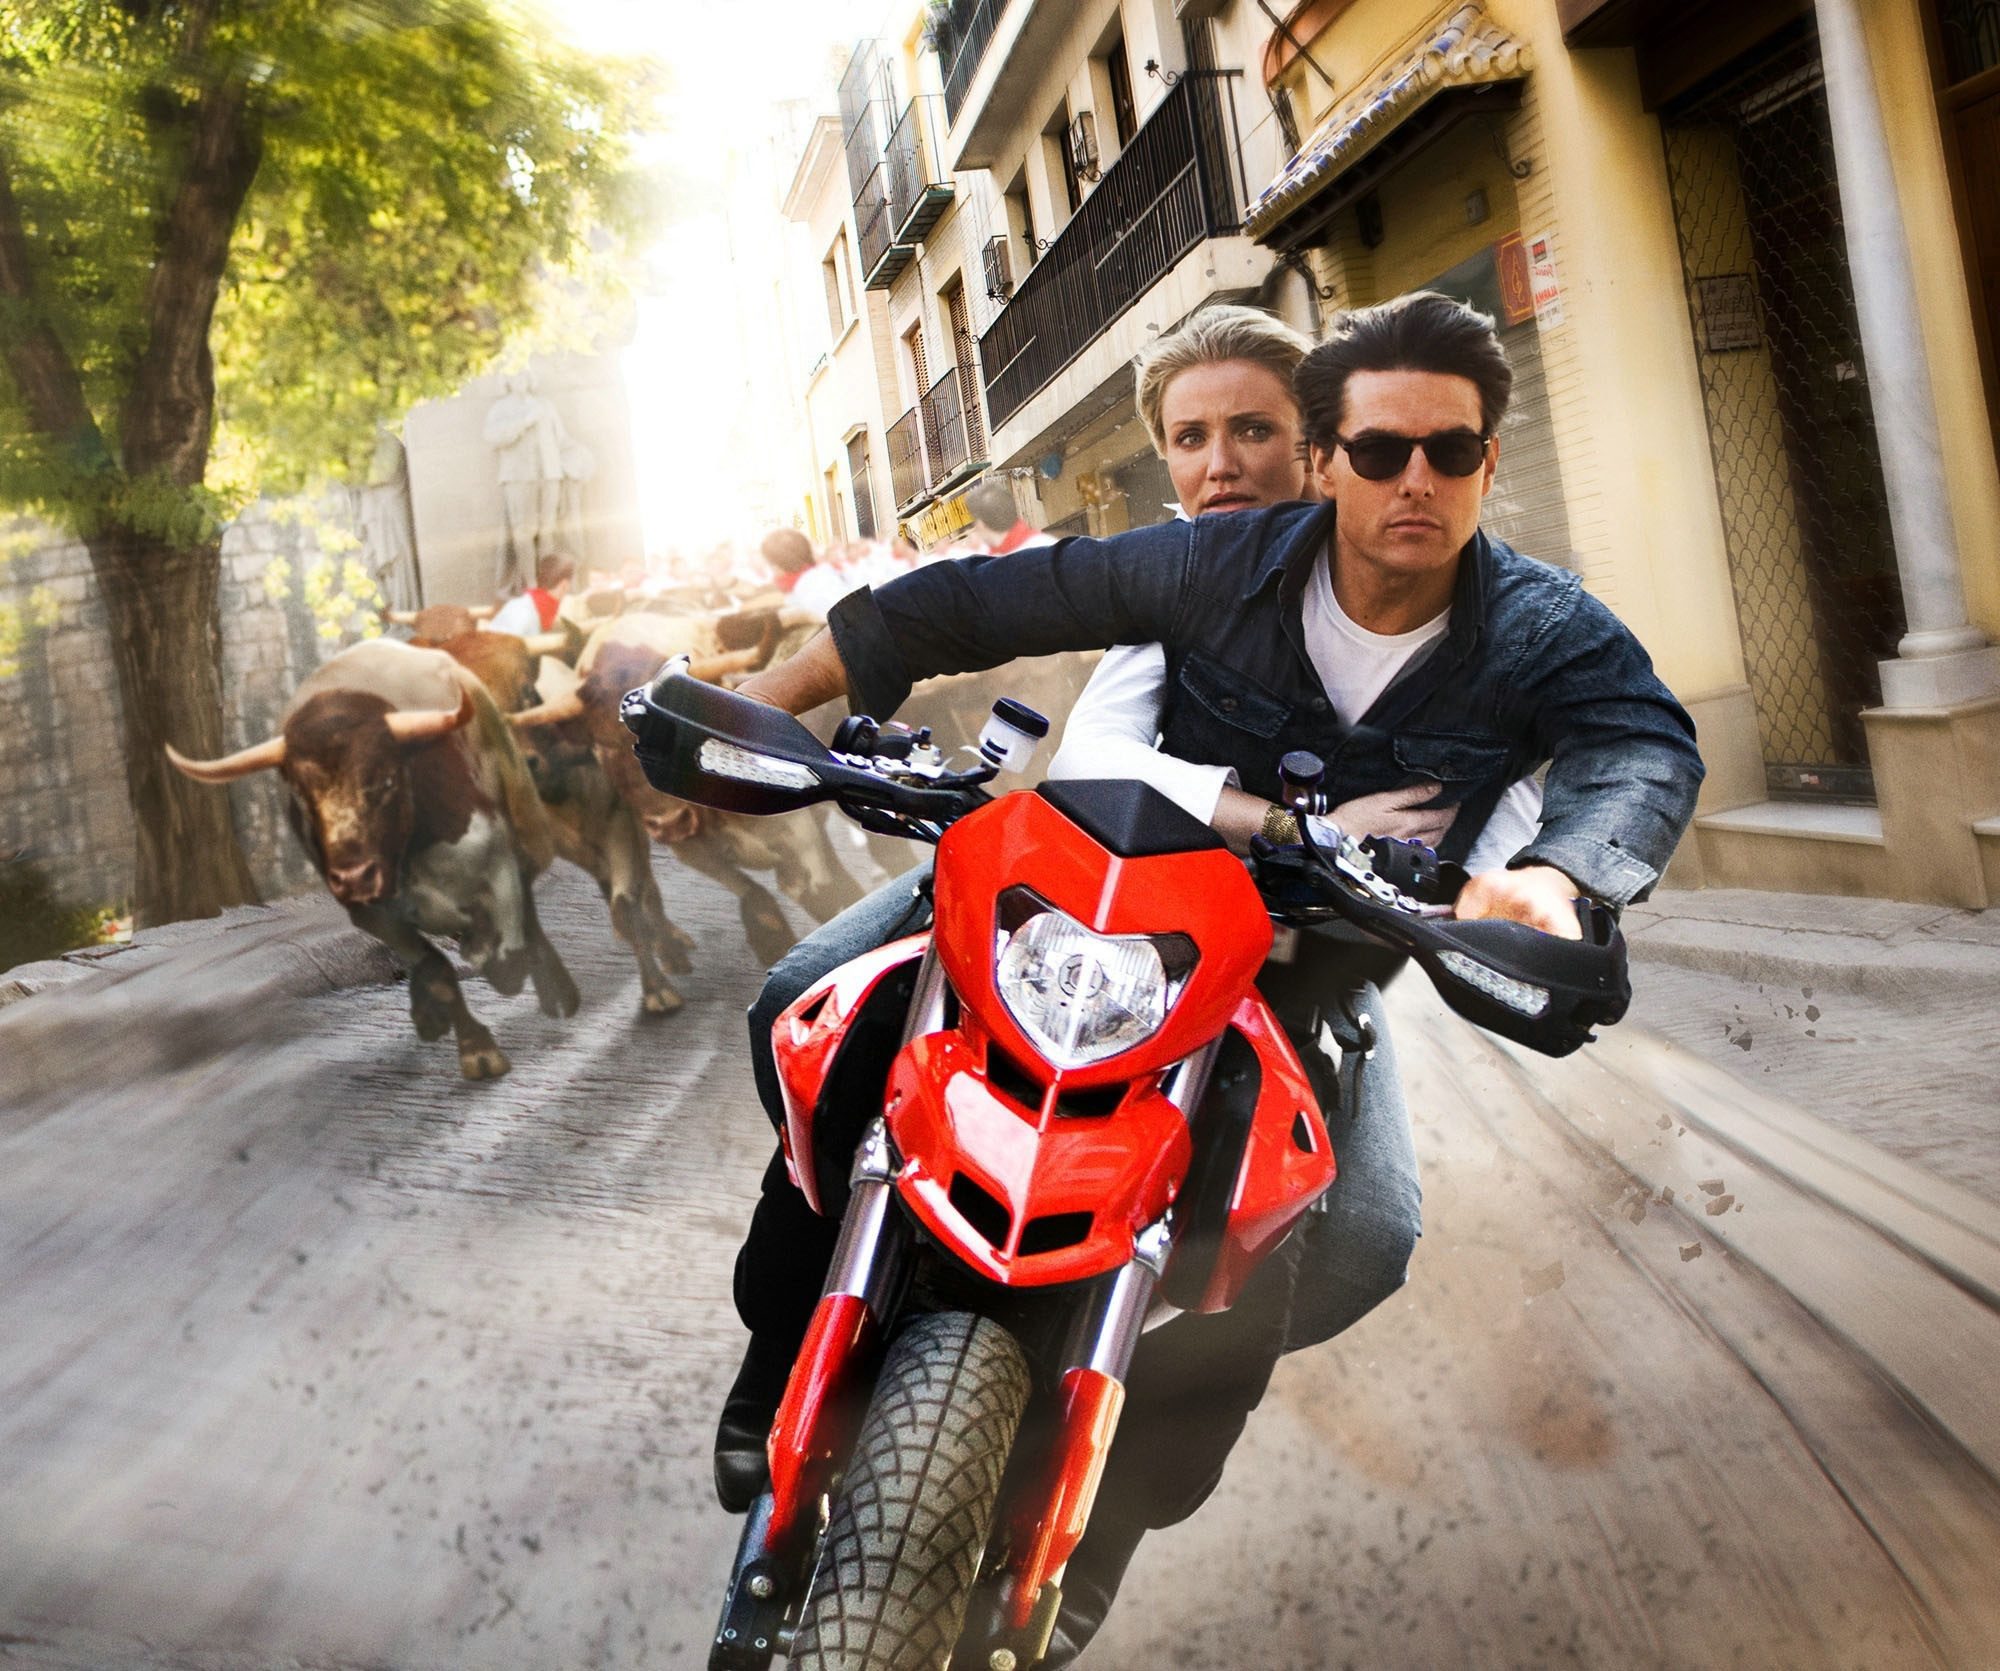 Knight and Day, Tom Cruise, Krasch